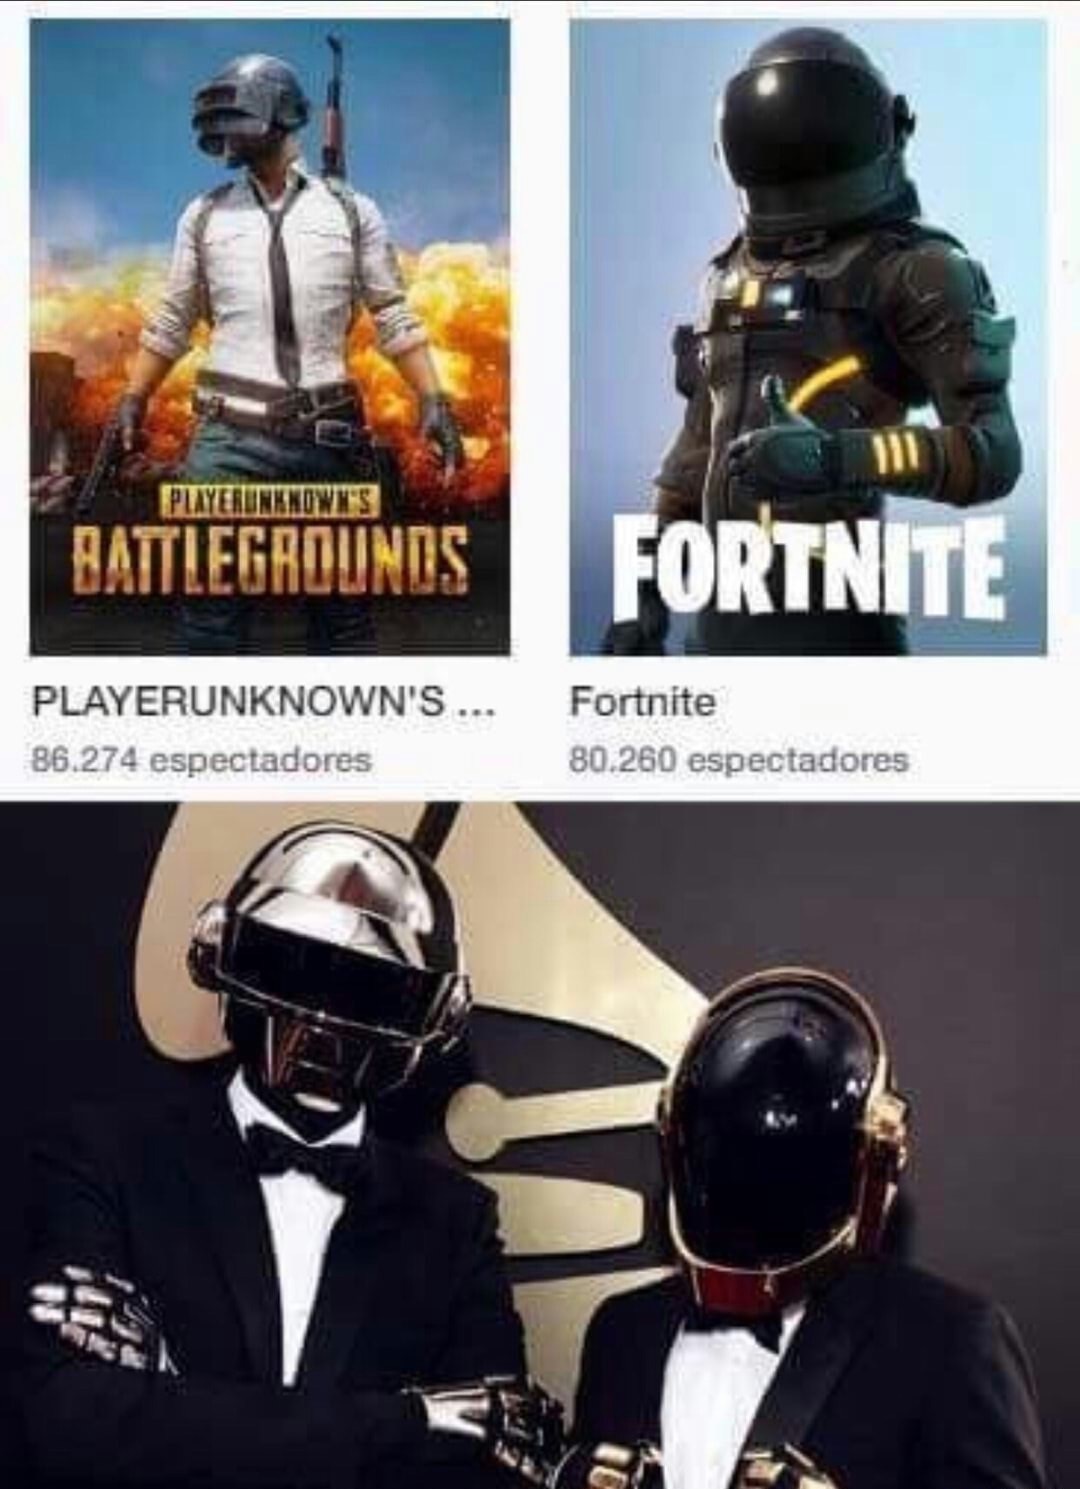 Savage Thursday meme about the Daft Punk musicians starring in video games